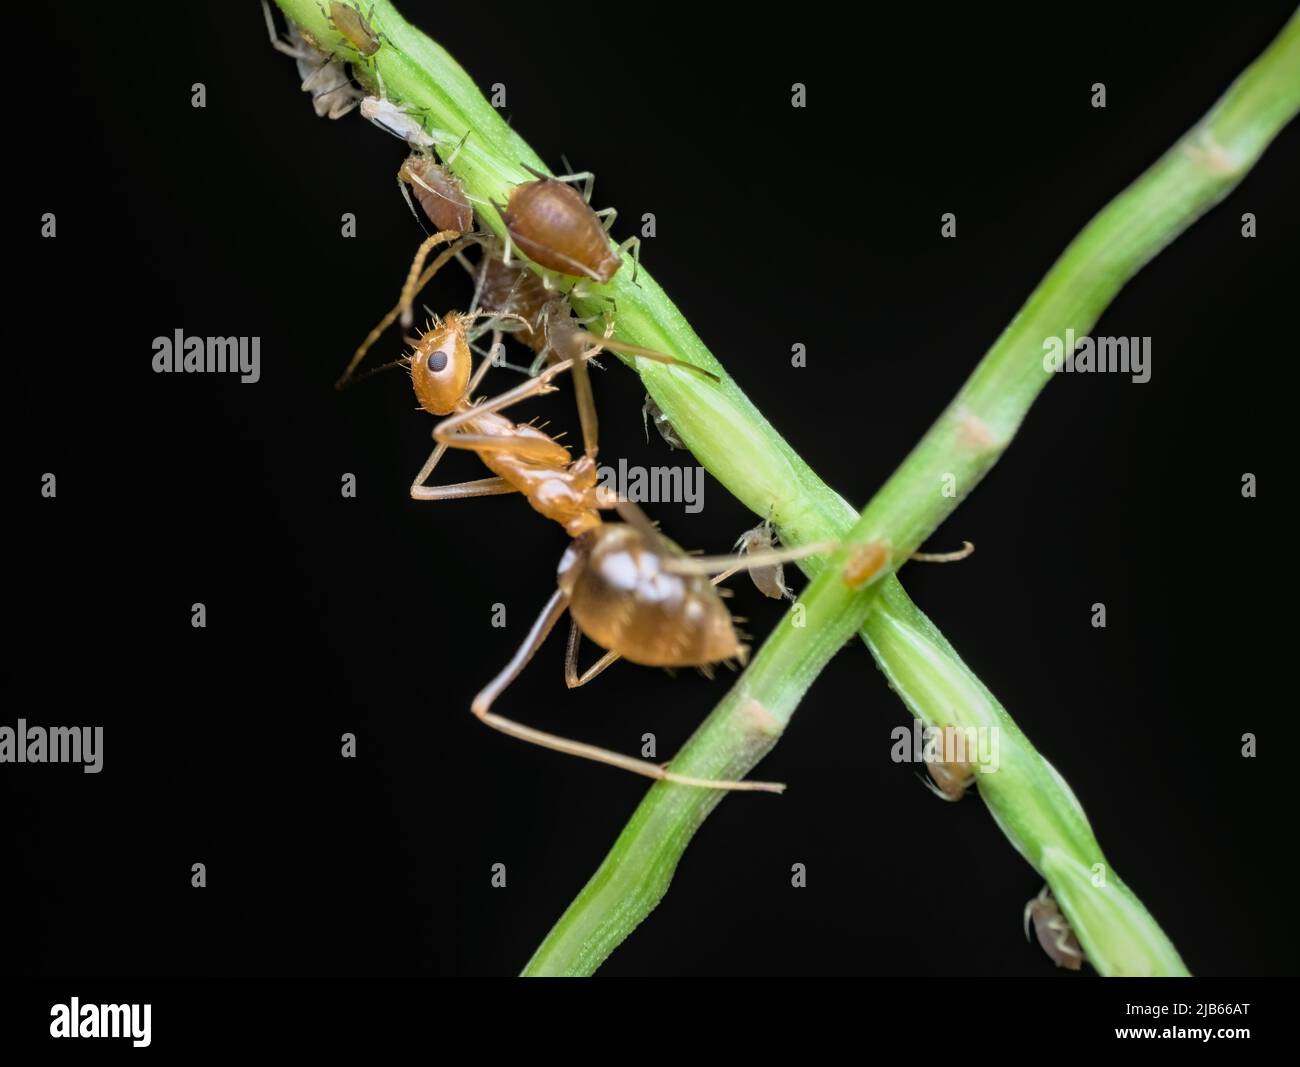 Crazy yellow ant doing symbiosis mutualism with apids on the grass Stock Photo